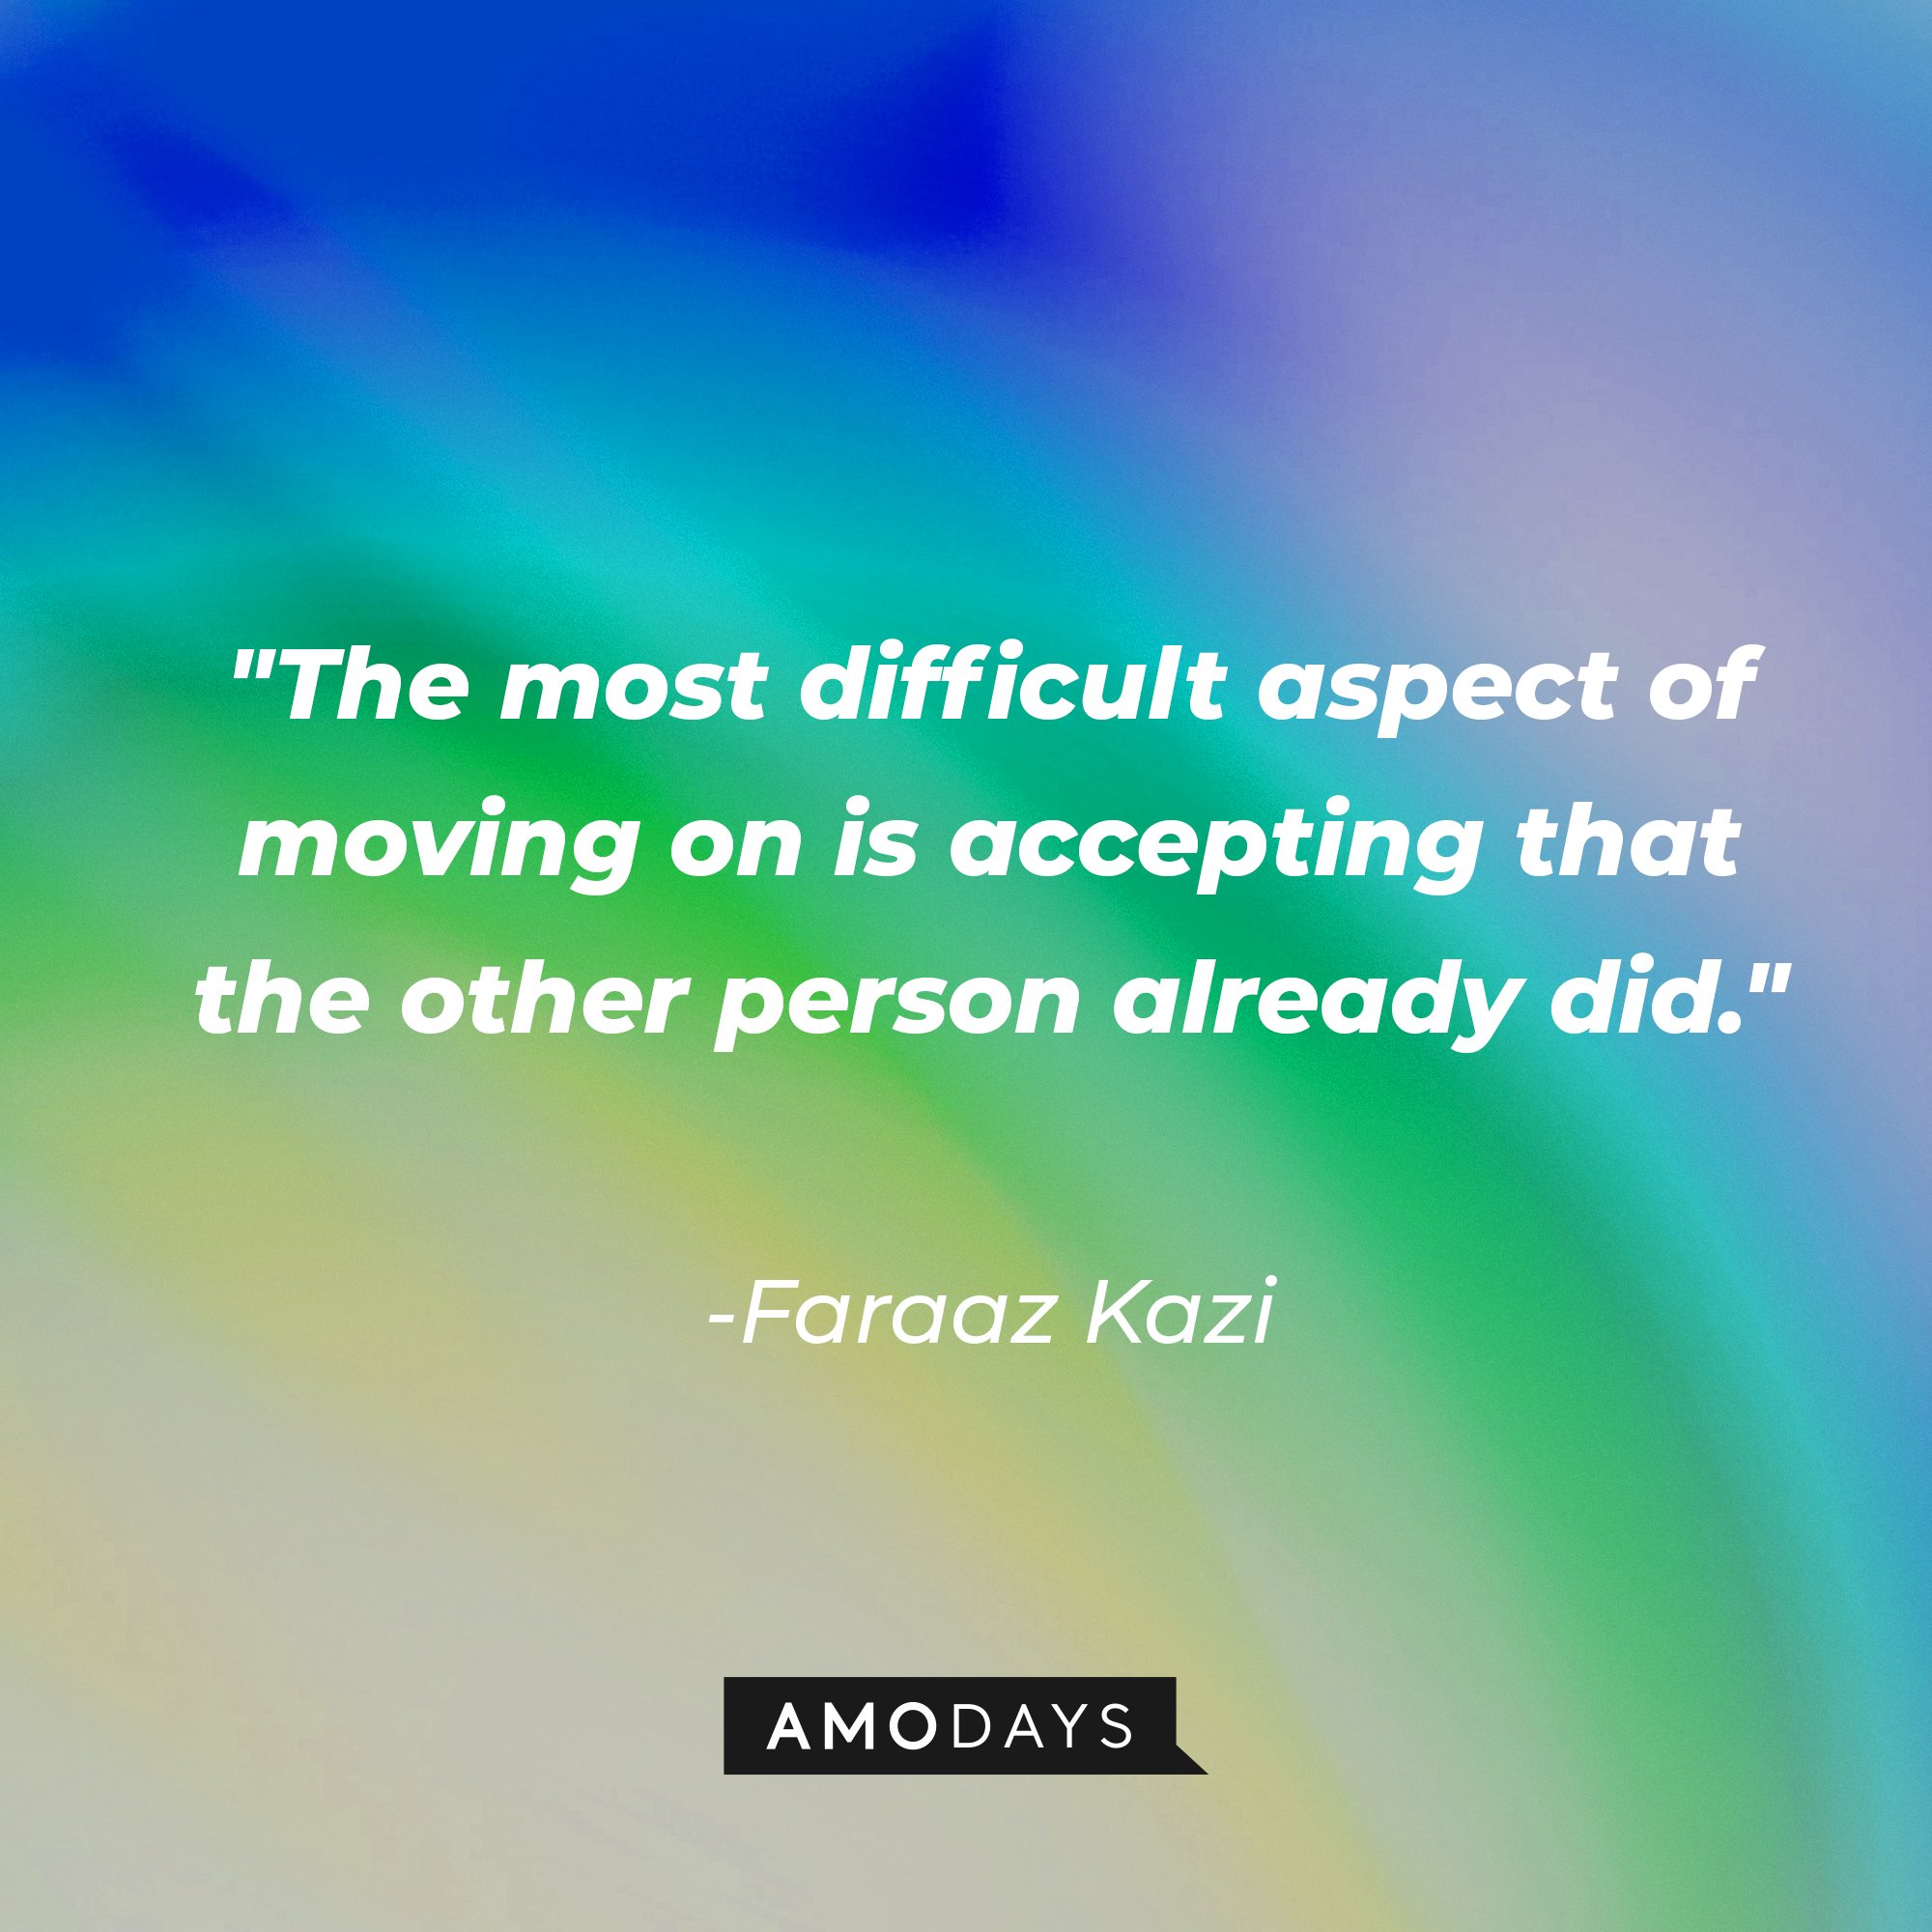 Faraaz Kazi's quote: "The most difficult aspect of moving on is accepting that the other person already did." | Image: AmoDays